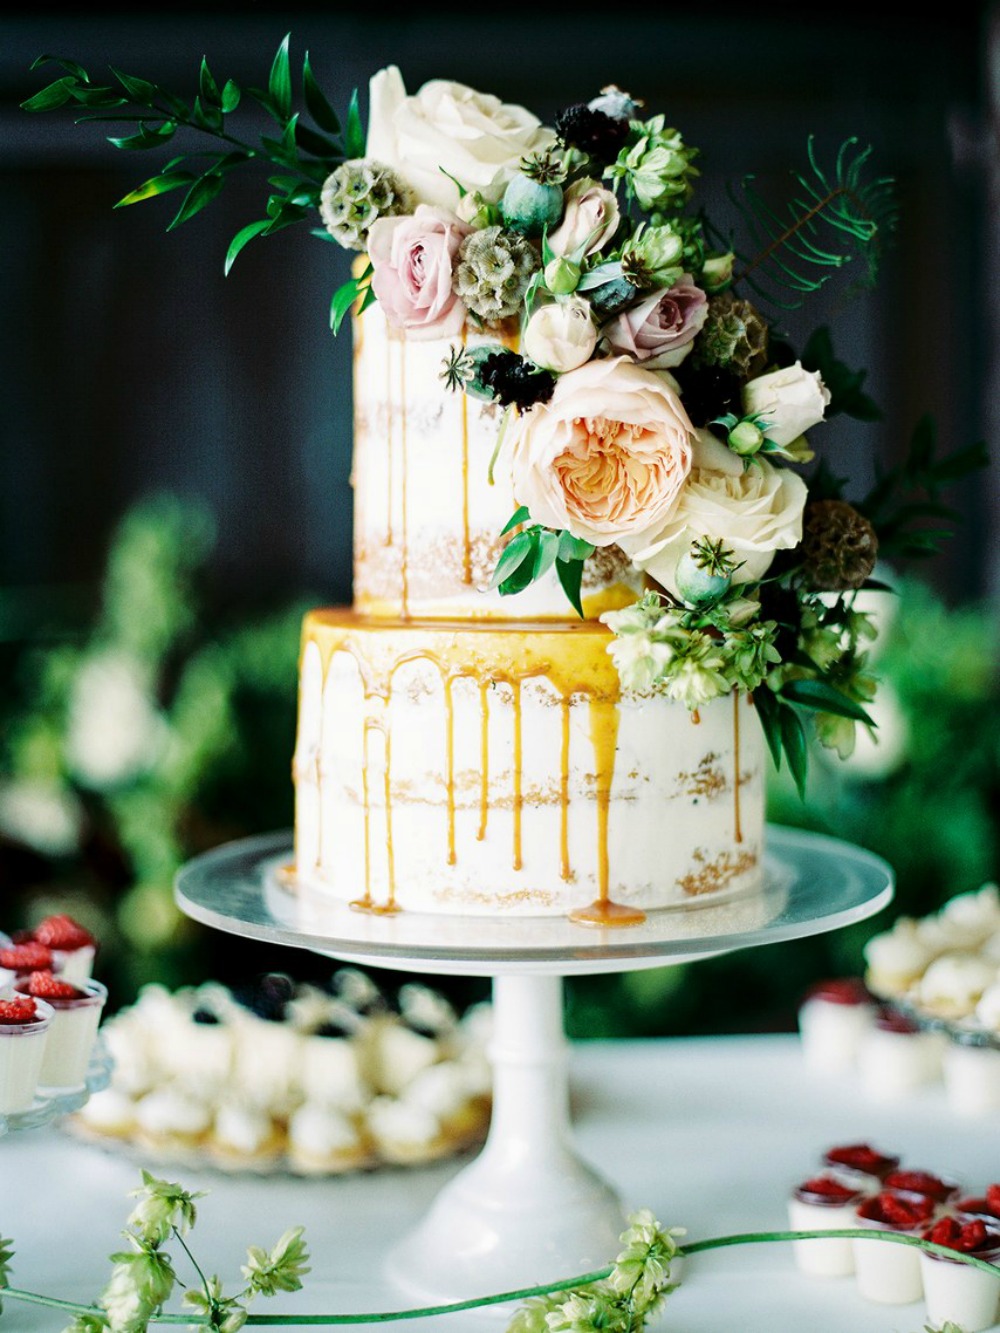 20 Most Beautiful Wedding Cakes You’ll Want to See